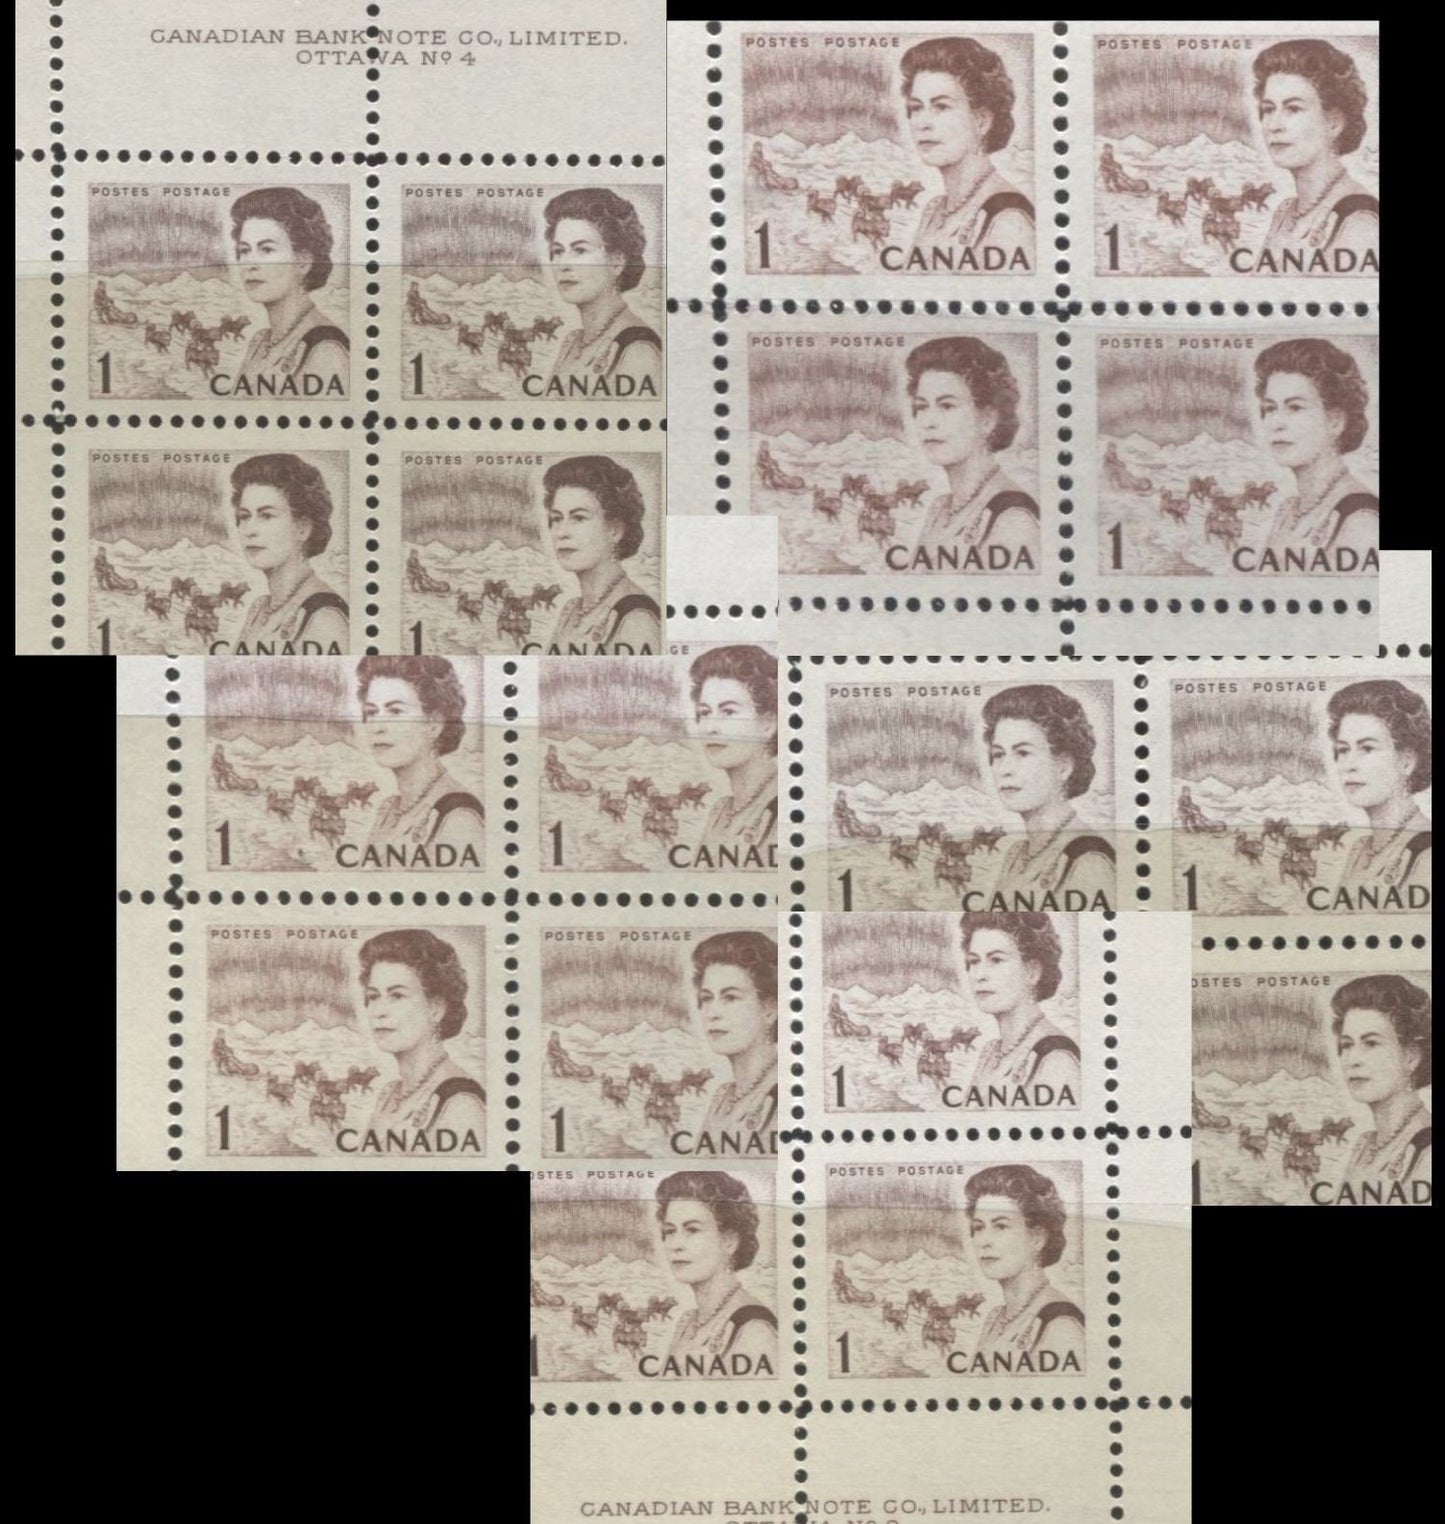 Lot #151 Canada #454piii 1c Brown, Reddish Chocolate & Reddish Brown, Northern Lights and Dogsled Team, 1967-1973 Centennial Issue, A Specialized Lot of 7 General Tagged Lower Left Corner Blocks on 4 Different LF-fl Papers, PVA Gum